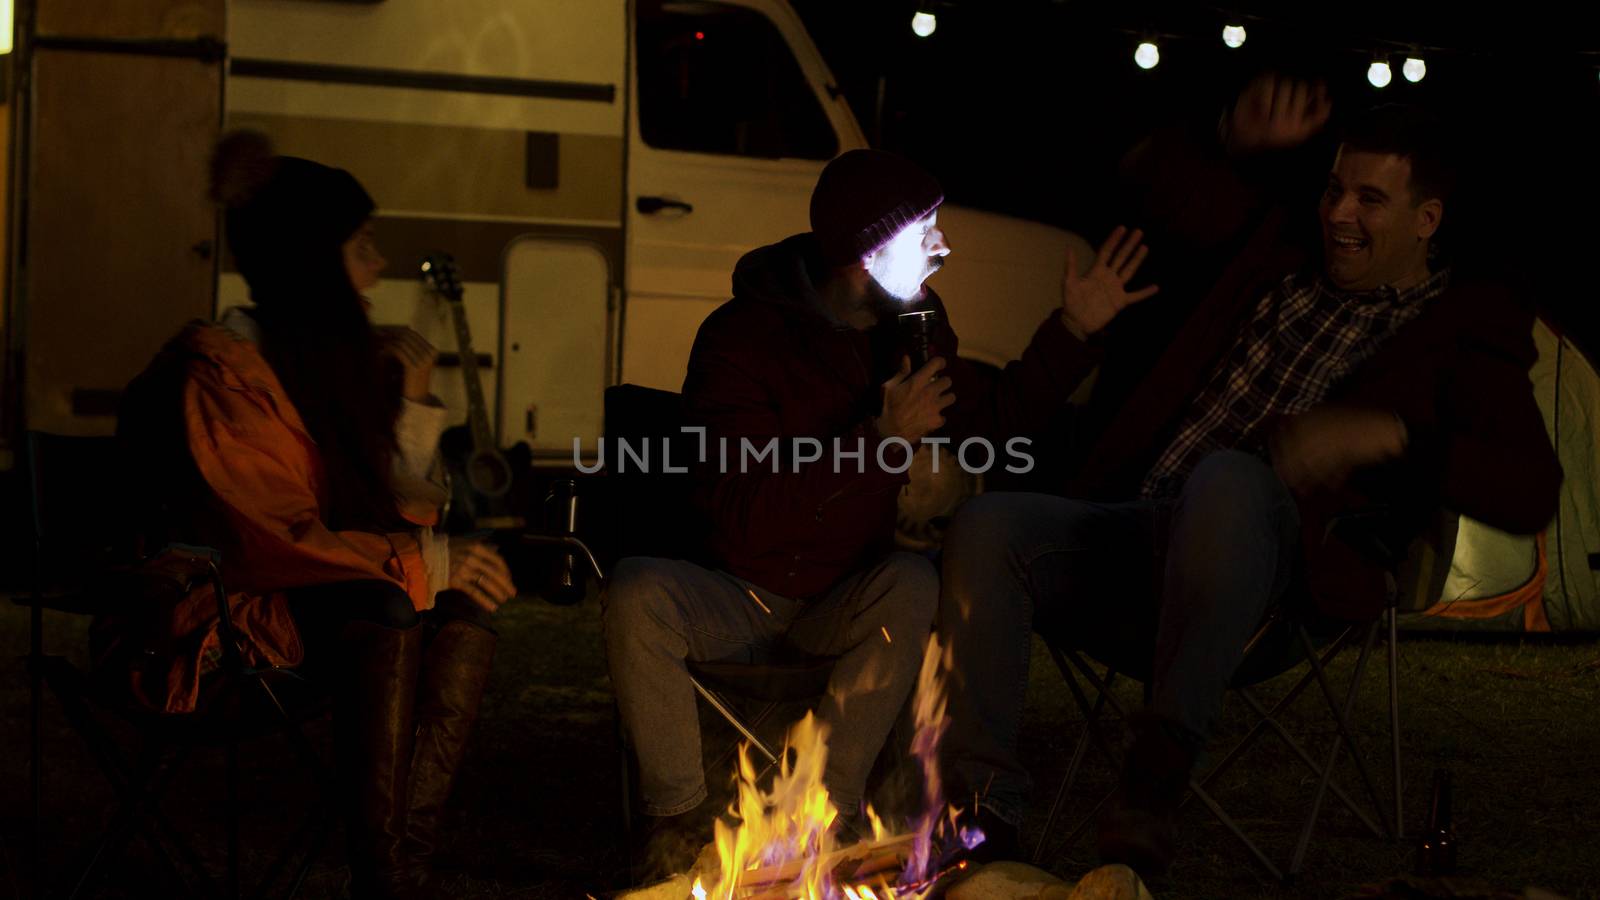 Bearded man telling a scary story to his friends around camp fire in a cold night of autumn. Retro camper van. Light bulbs